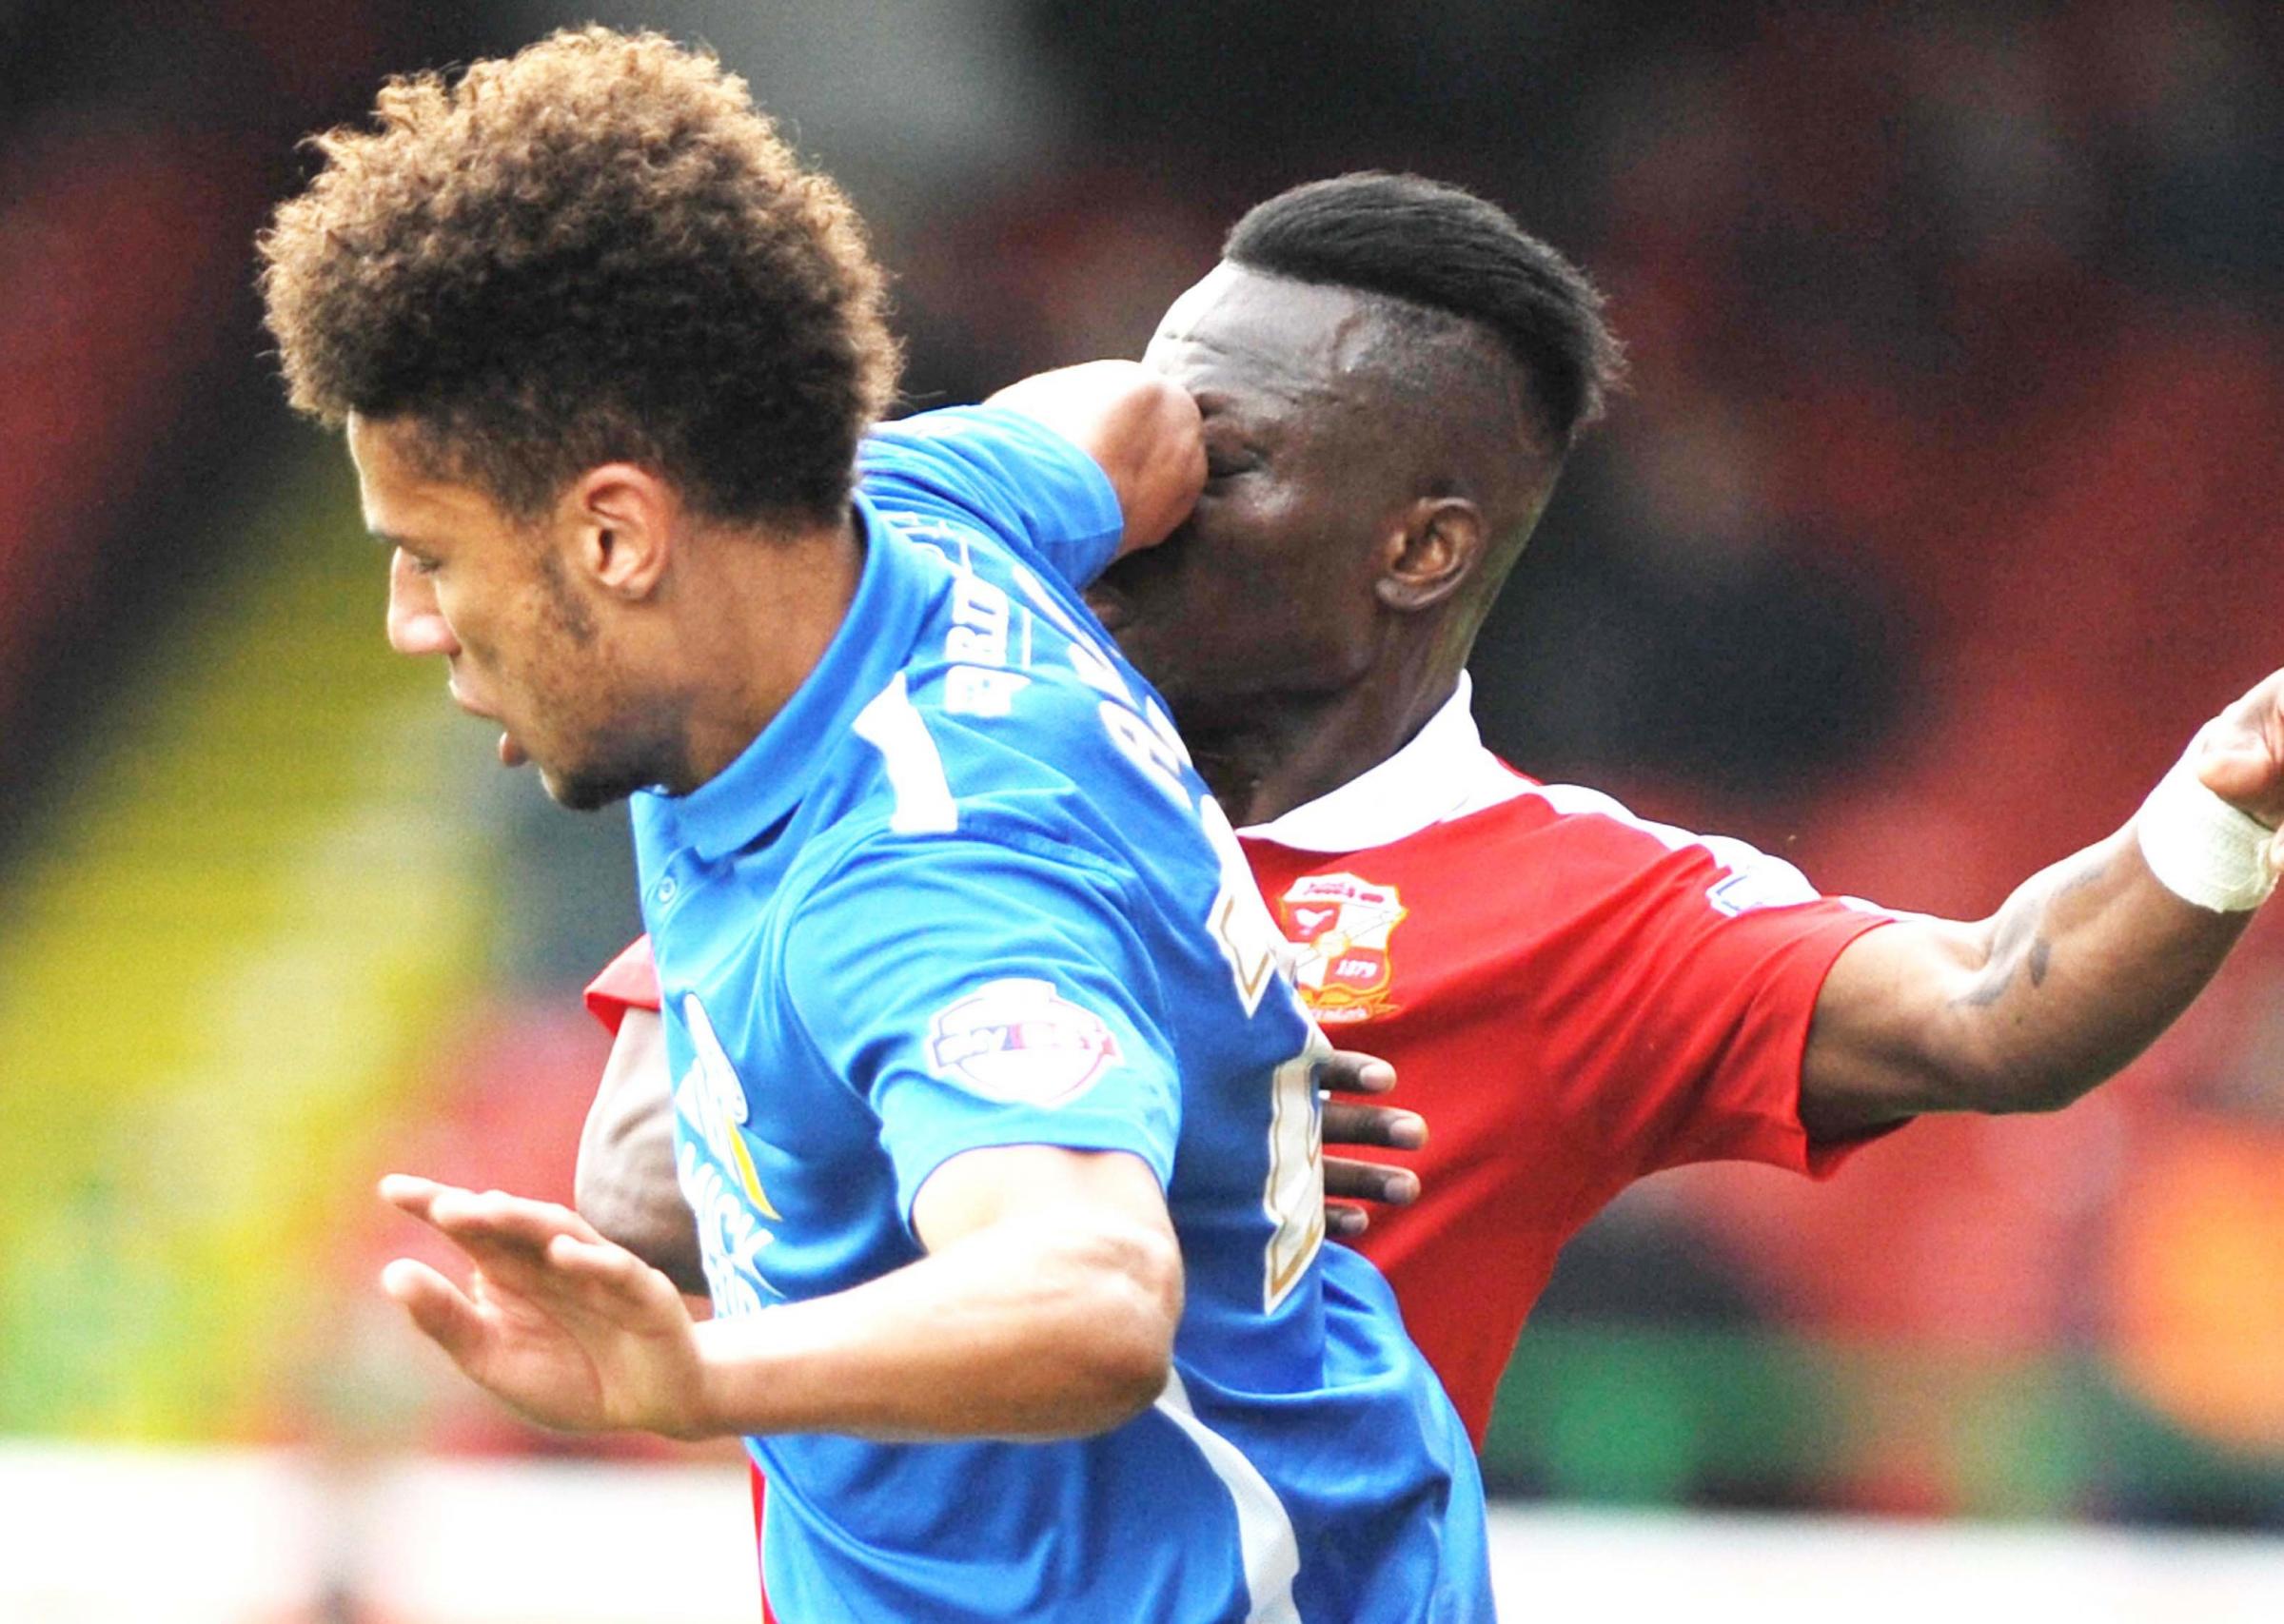 Lee Angol and Josh Ginnelly expected to freshen up Lincoln after ... - The Press, York